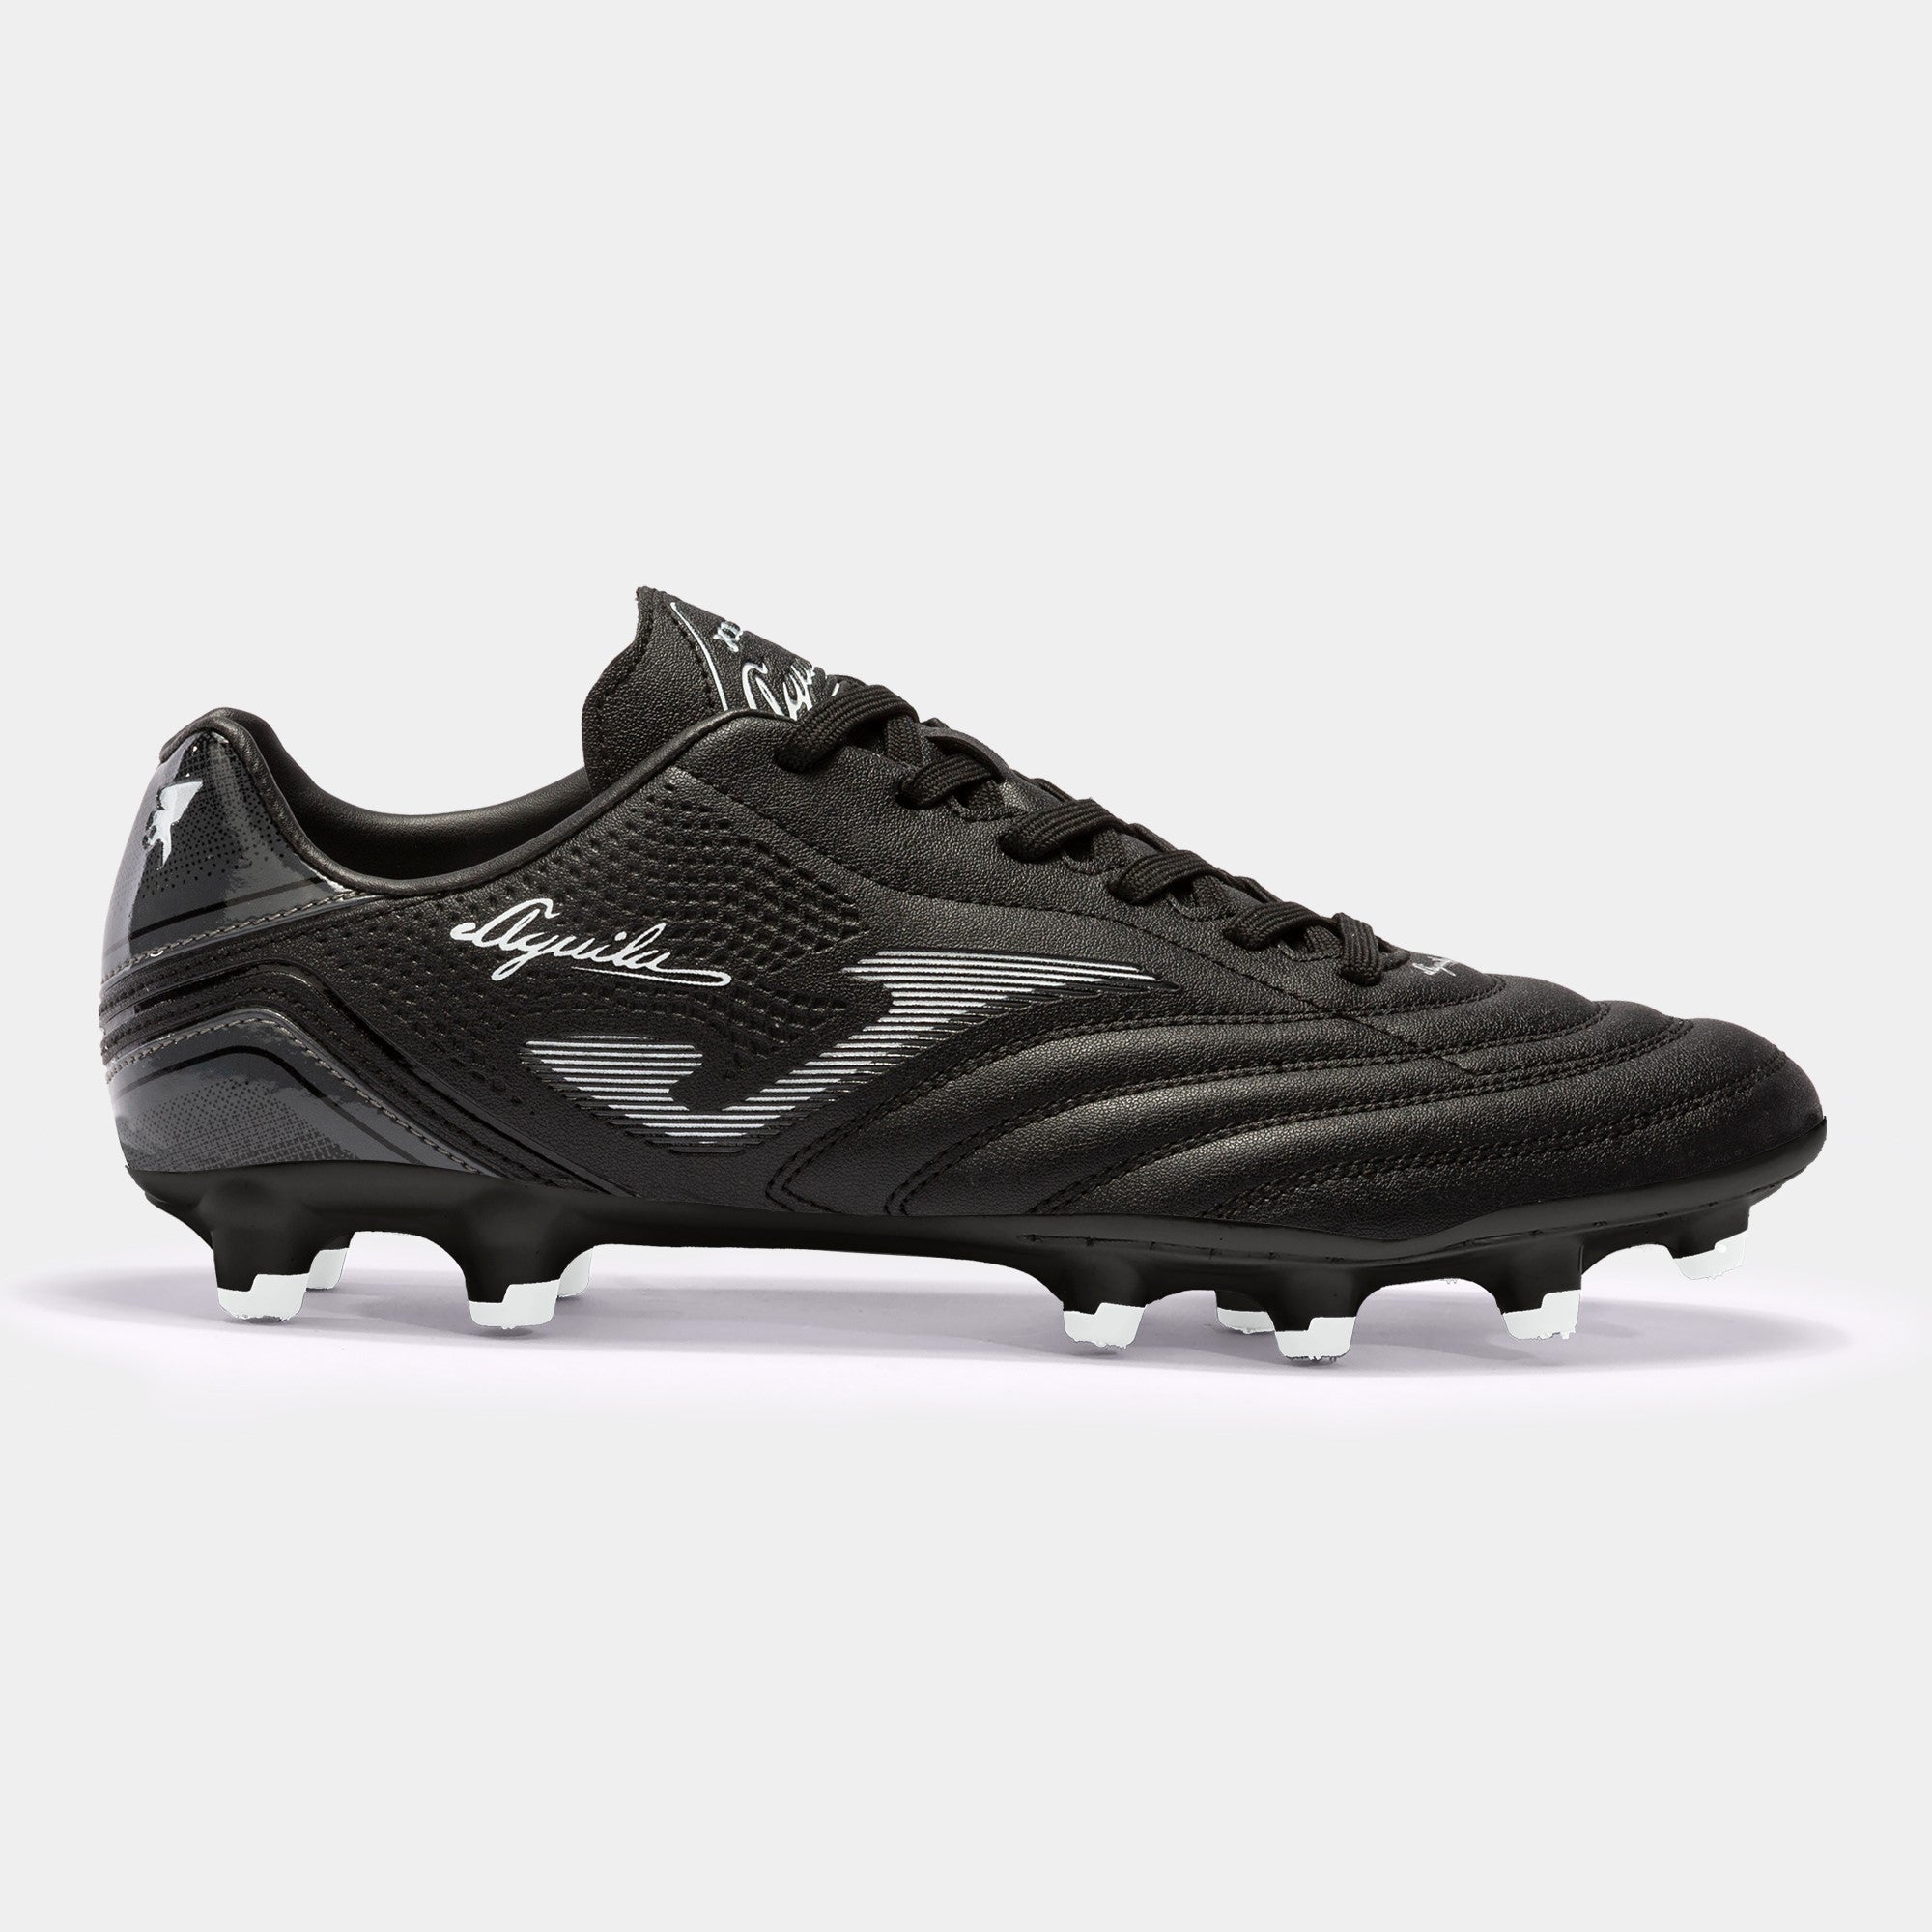 Joma Aguila 2201(AGUW2201FG) - Multi Stud Football Boot . Joma Sport | Trainers & Football Boots | Wisemans | Bantry | West Cork | Munster | Ireland